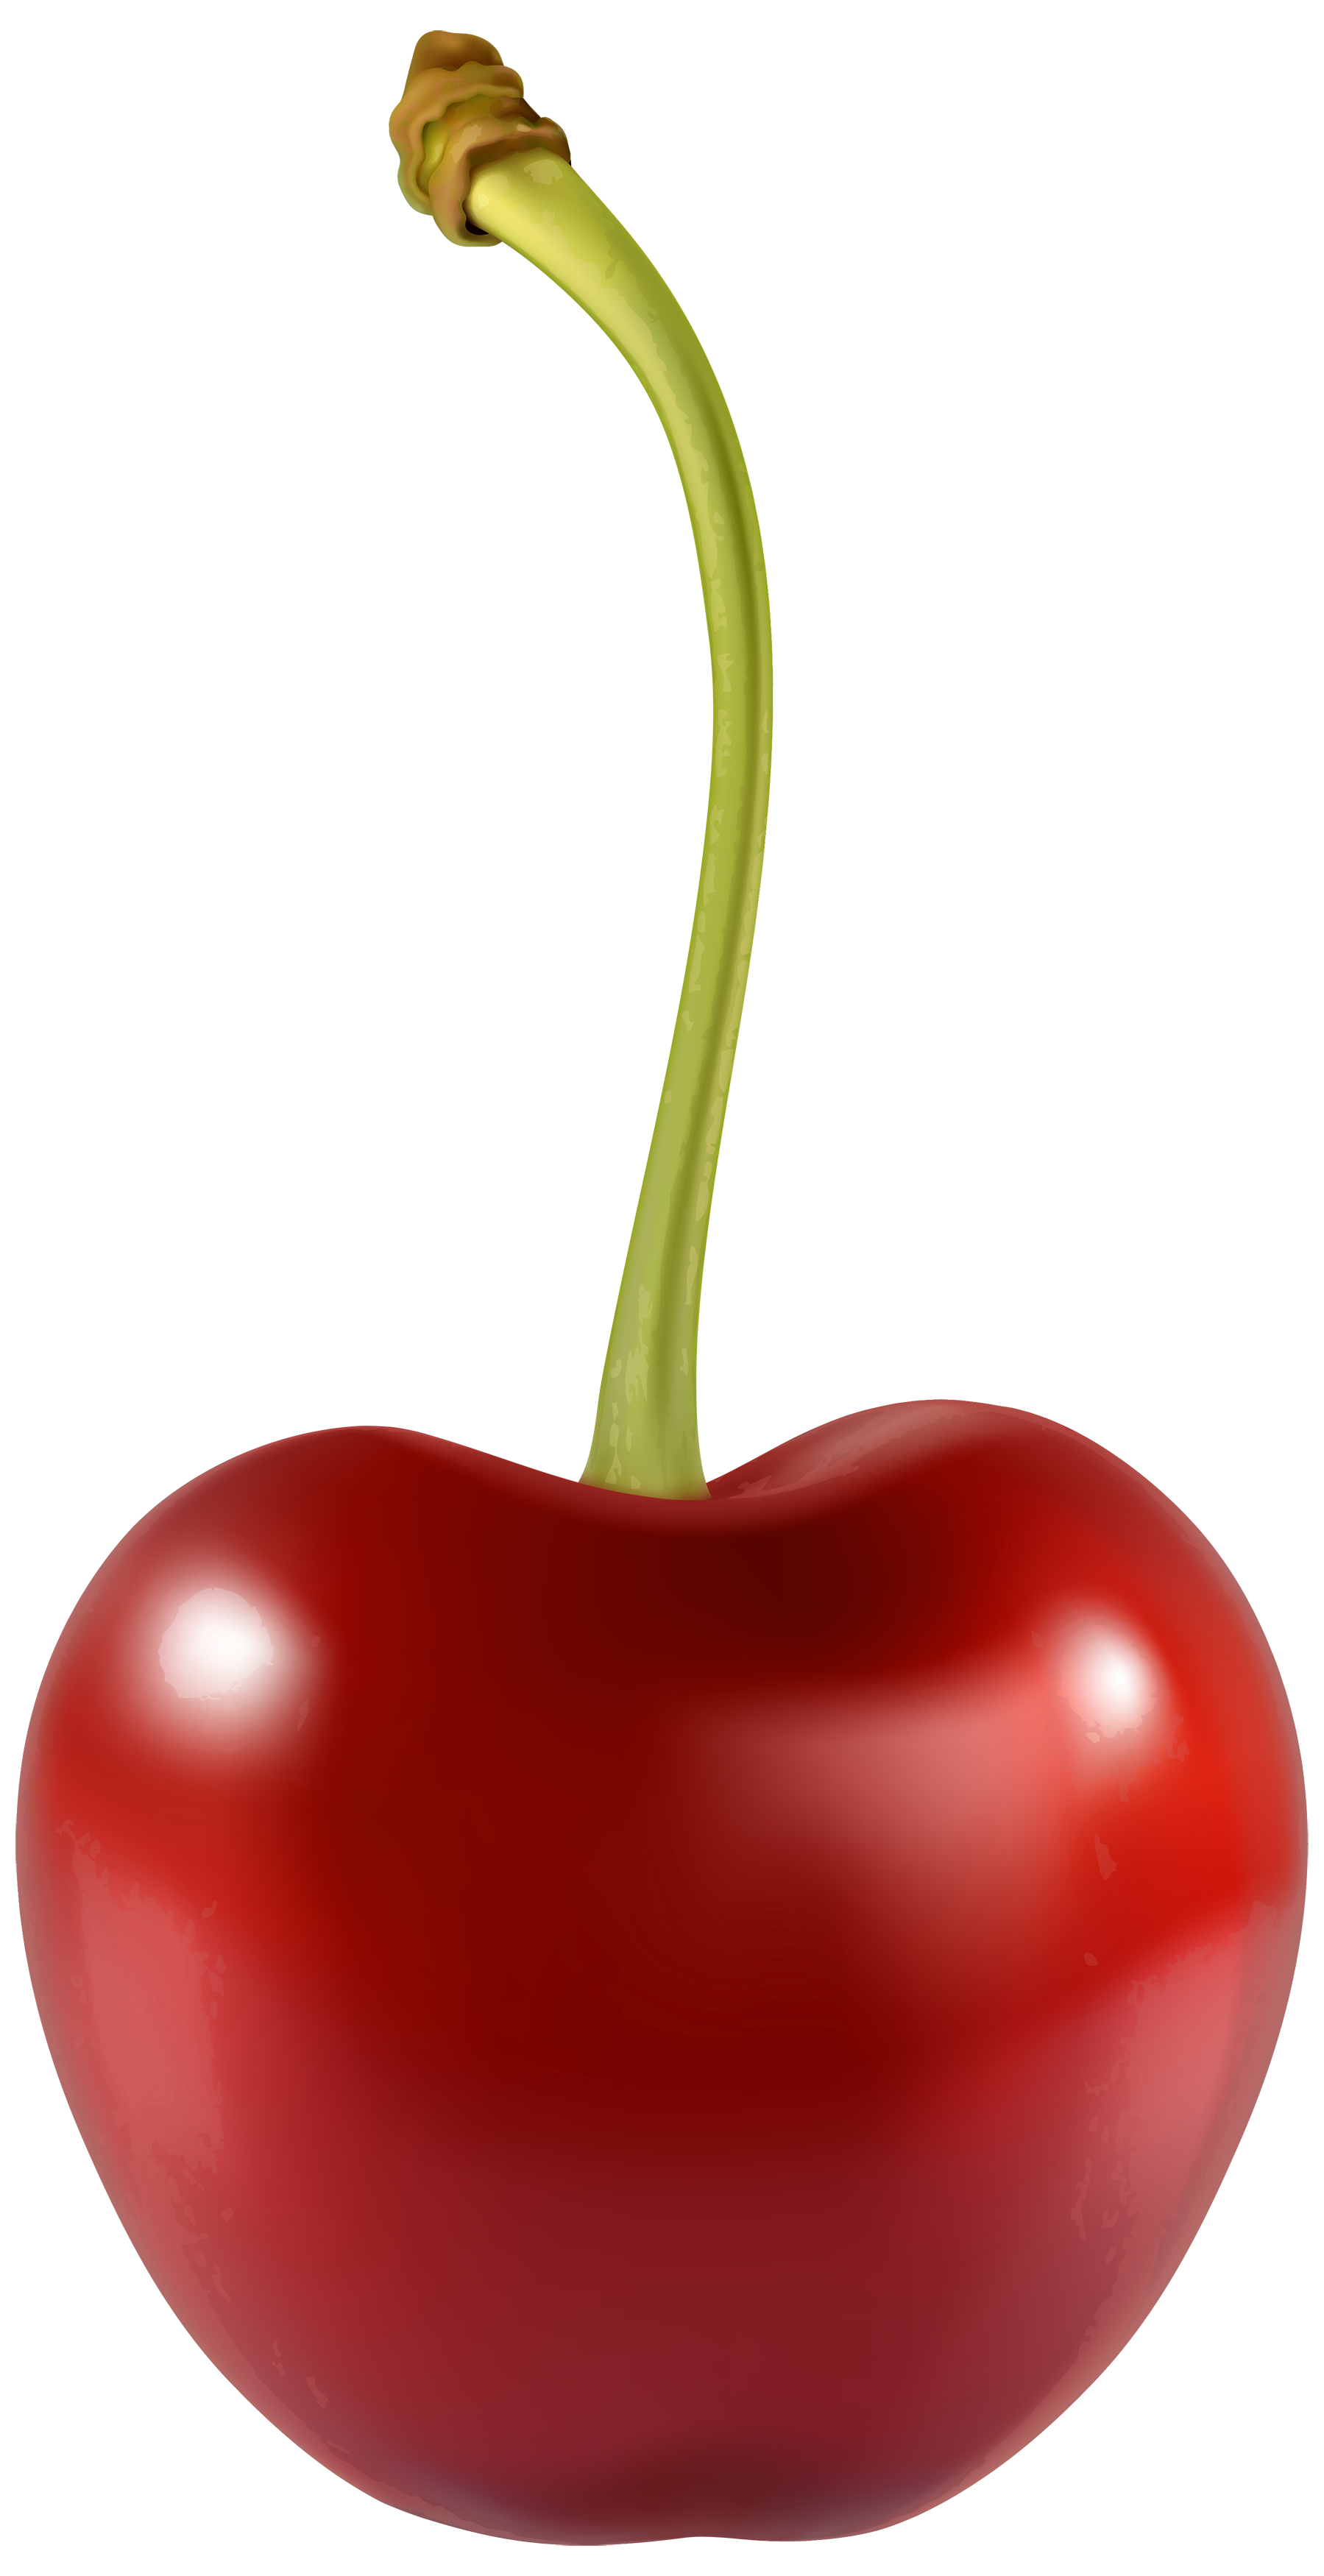 Png best web. Ice clipart cherry